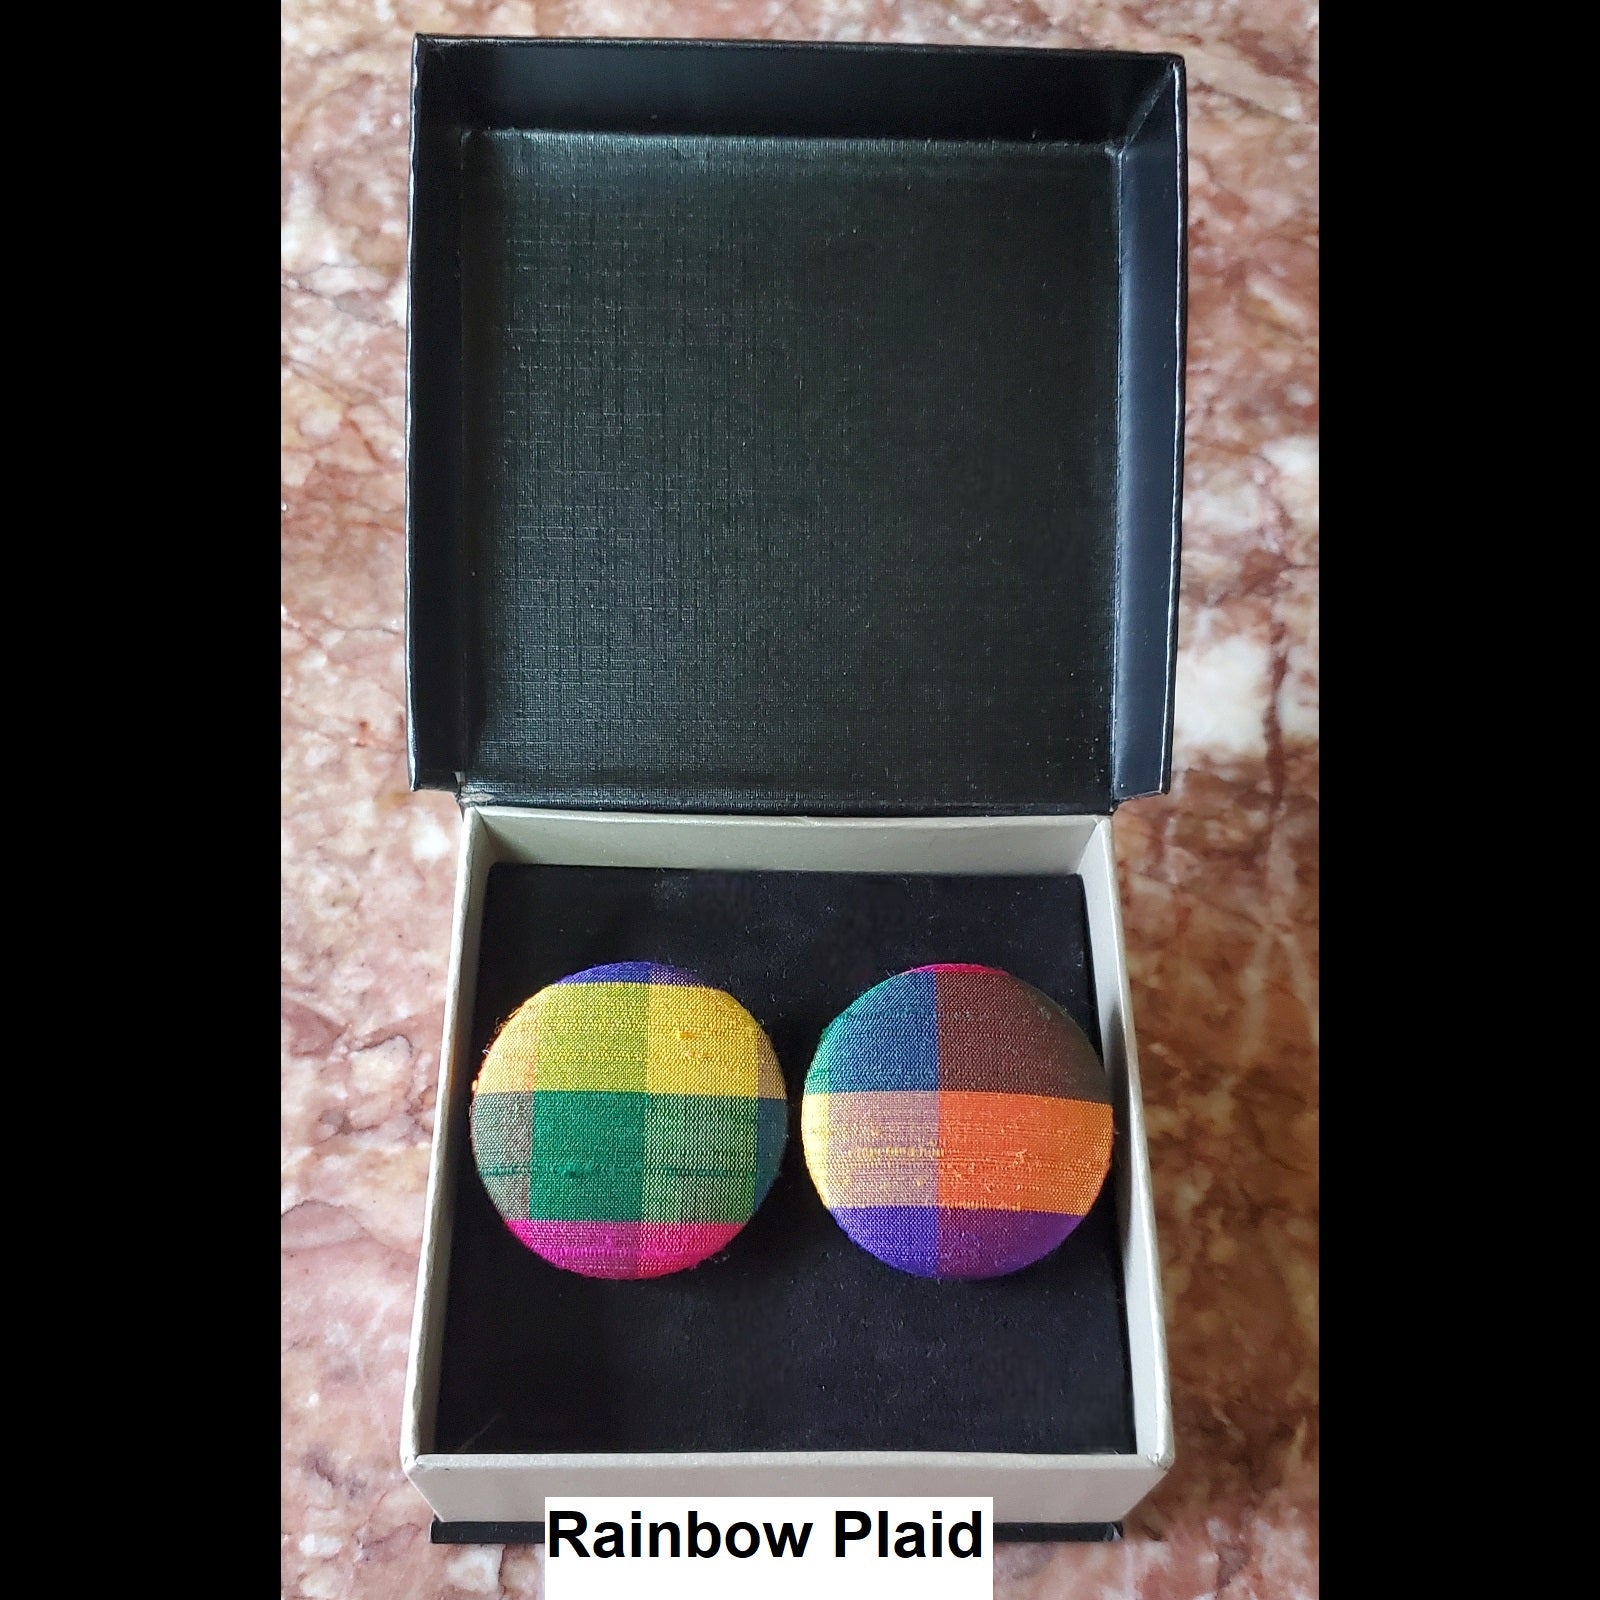 Rainbow Plaid button earrings in jewelry box